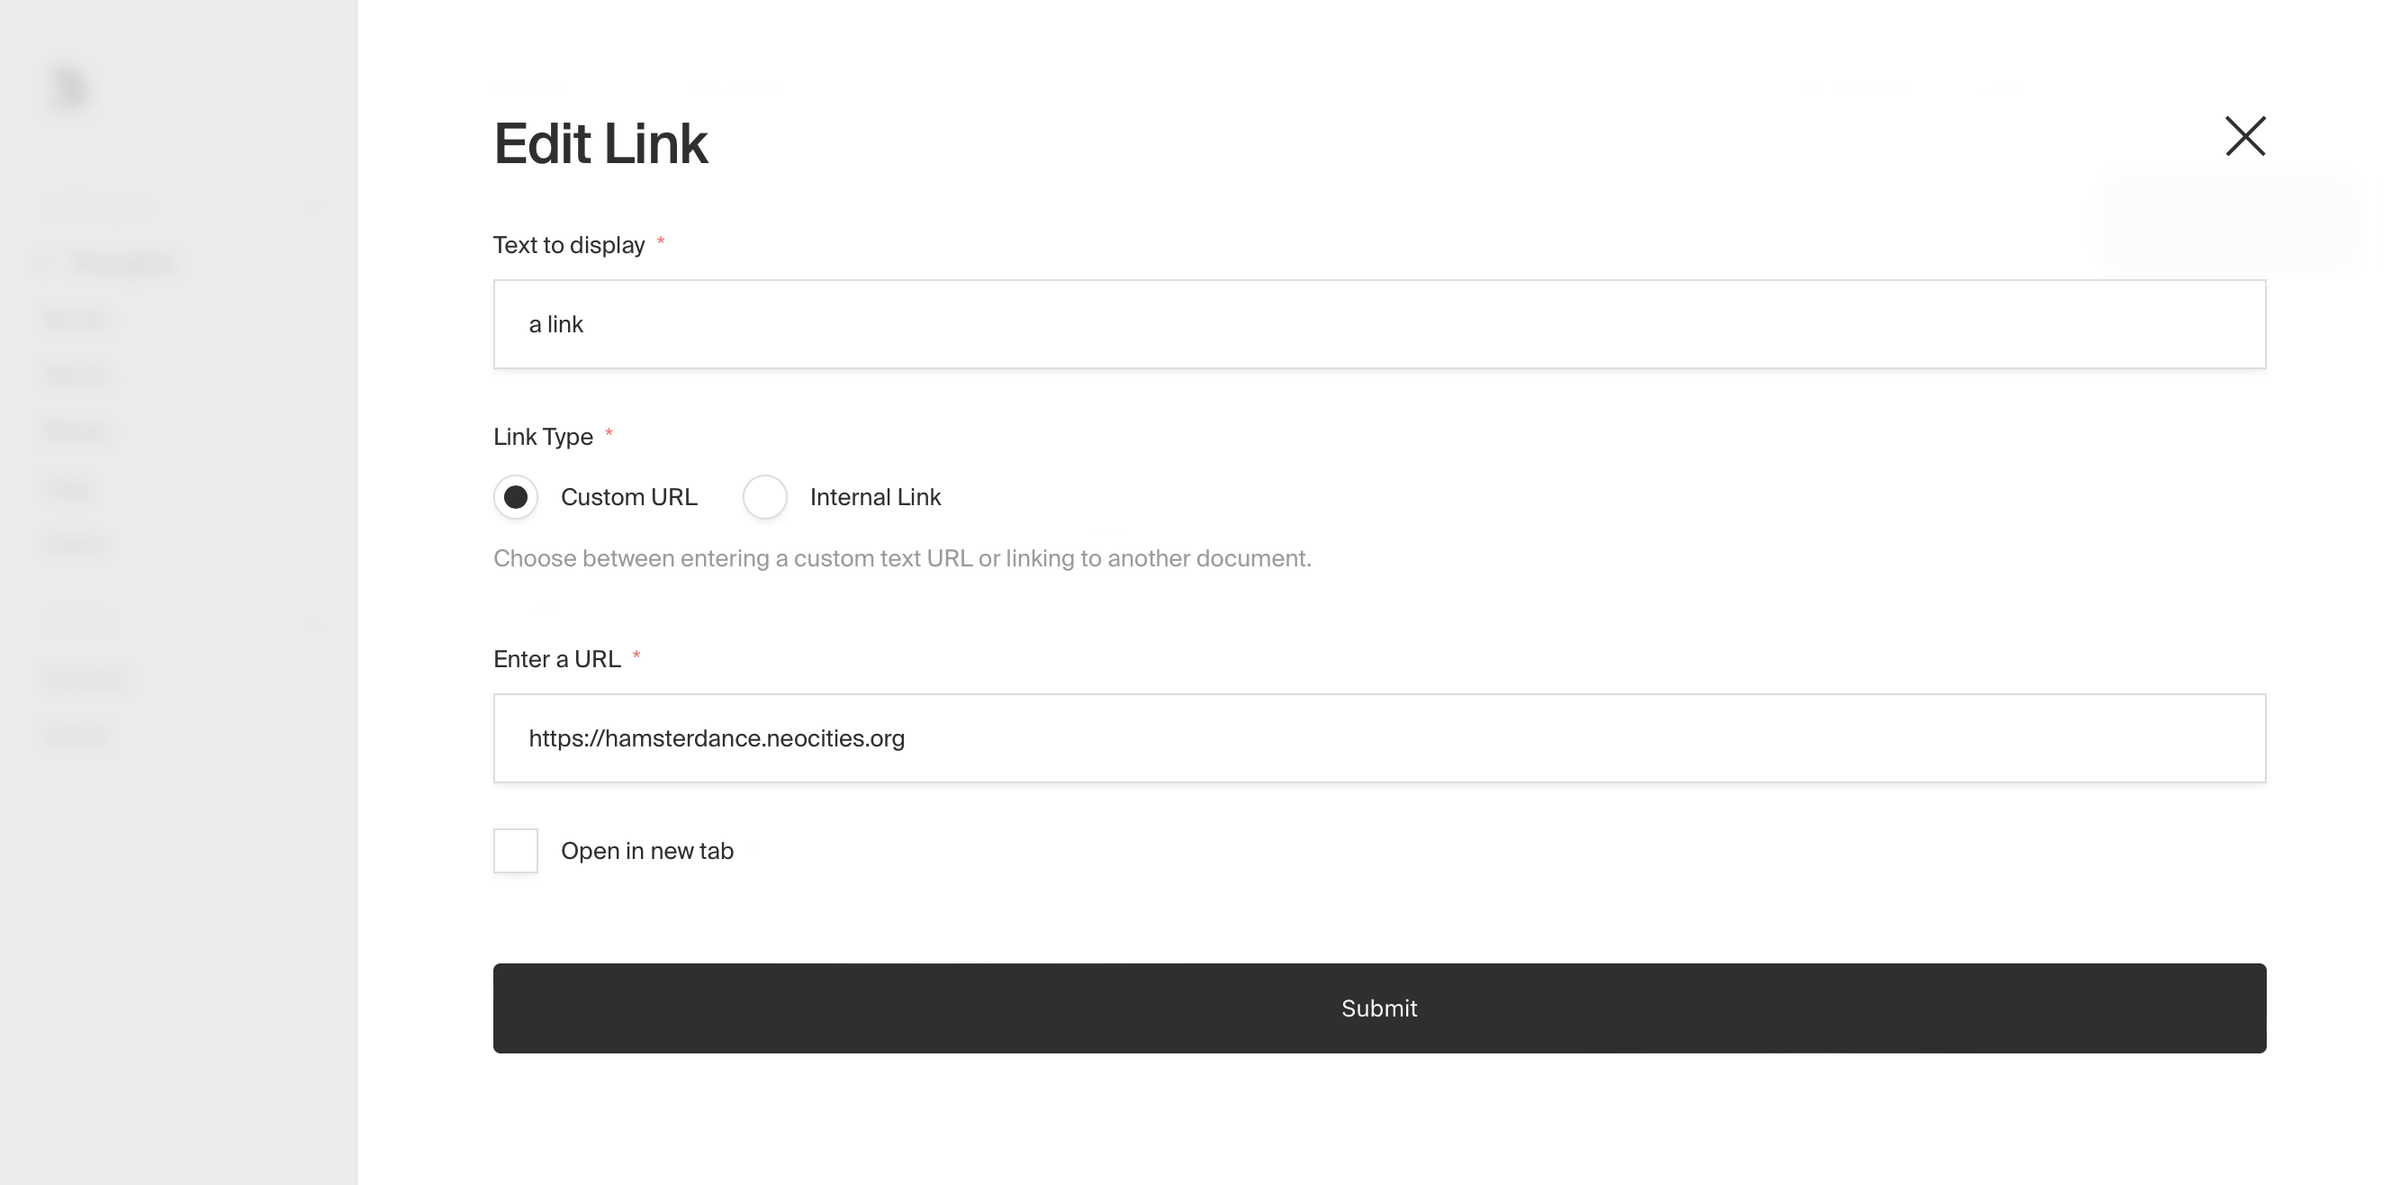 Payload’s “Edit Link” pane, which includes fields for the link text, the type (Custom URL or Internal Link), the URL itself, and an “Open in new tab” checkbox